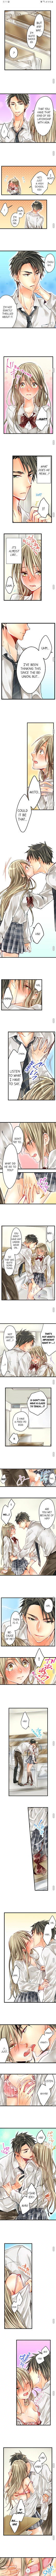 25-Year-Old High School Girl, I Wouldn’t Do This with a Kid Ch.14